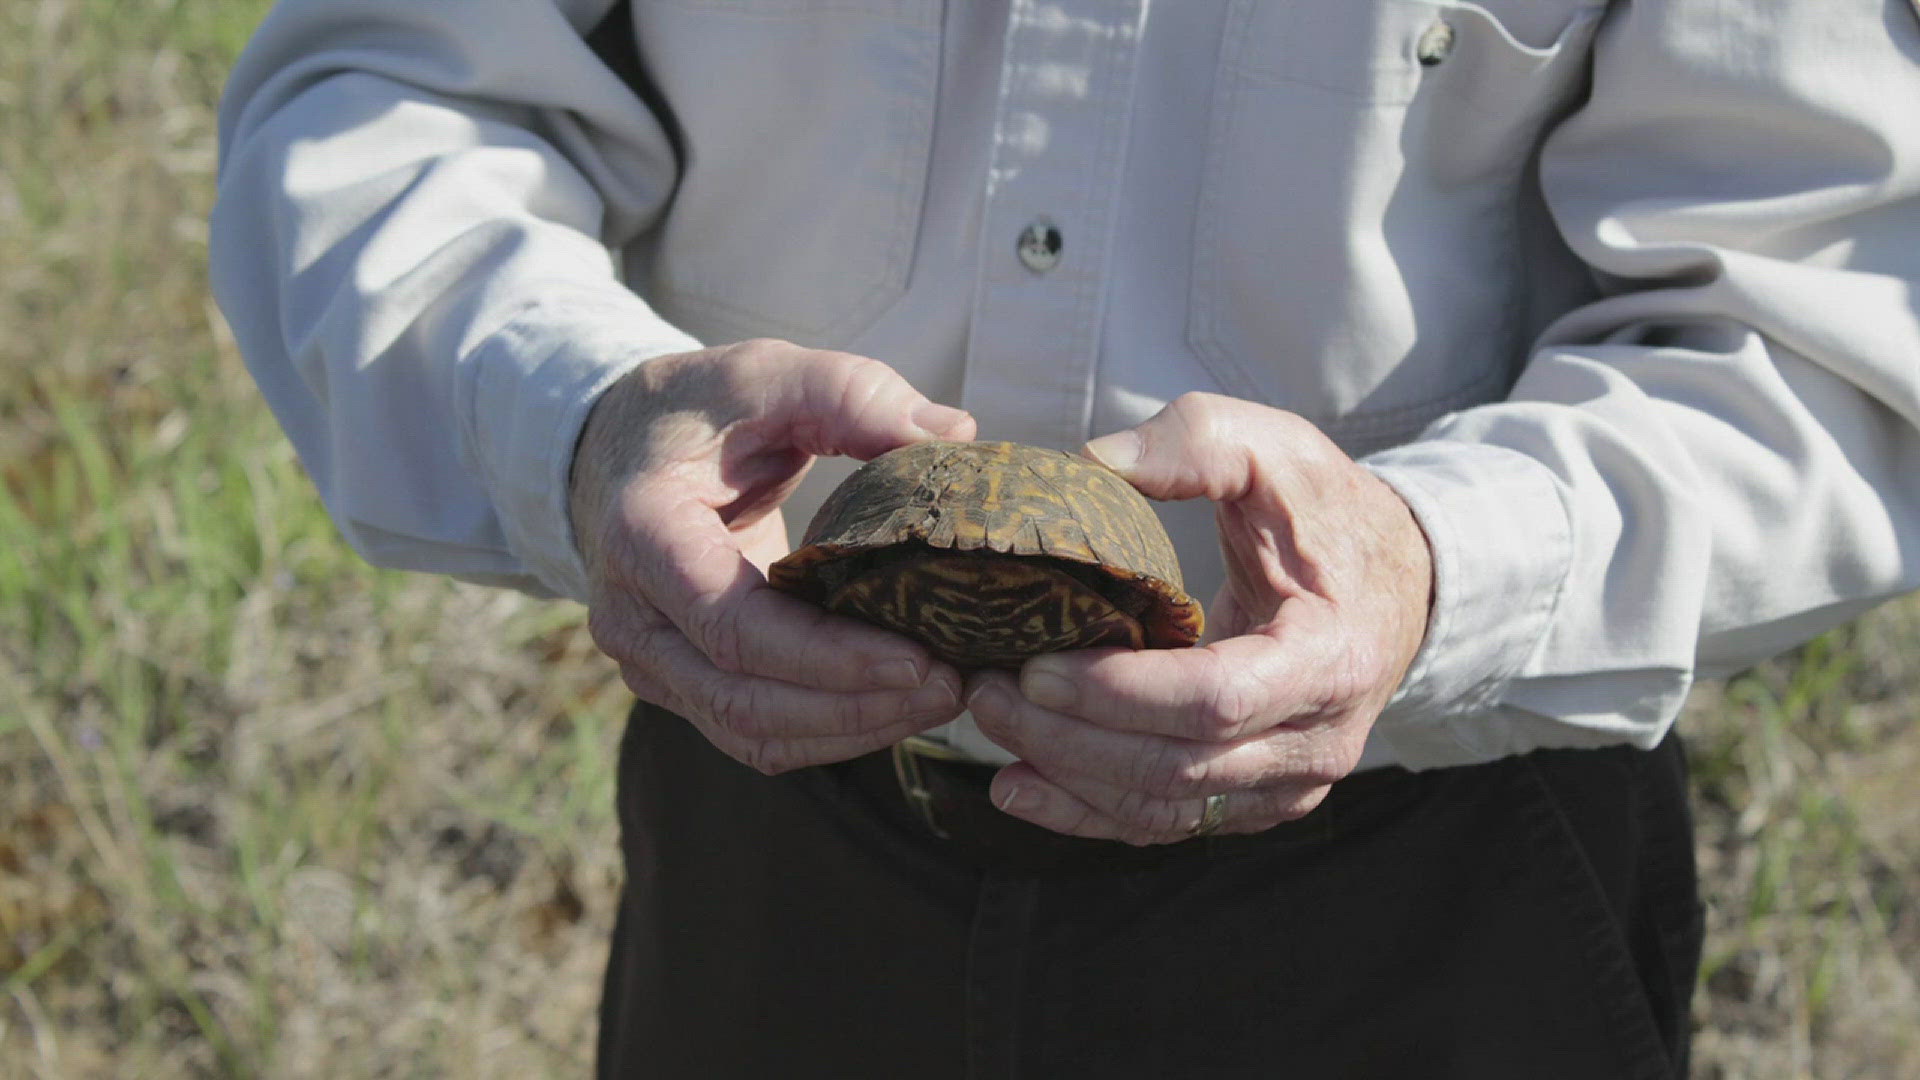 The federally-protected land is a haven for Ornate Box Turtles.